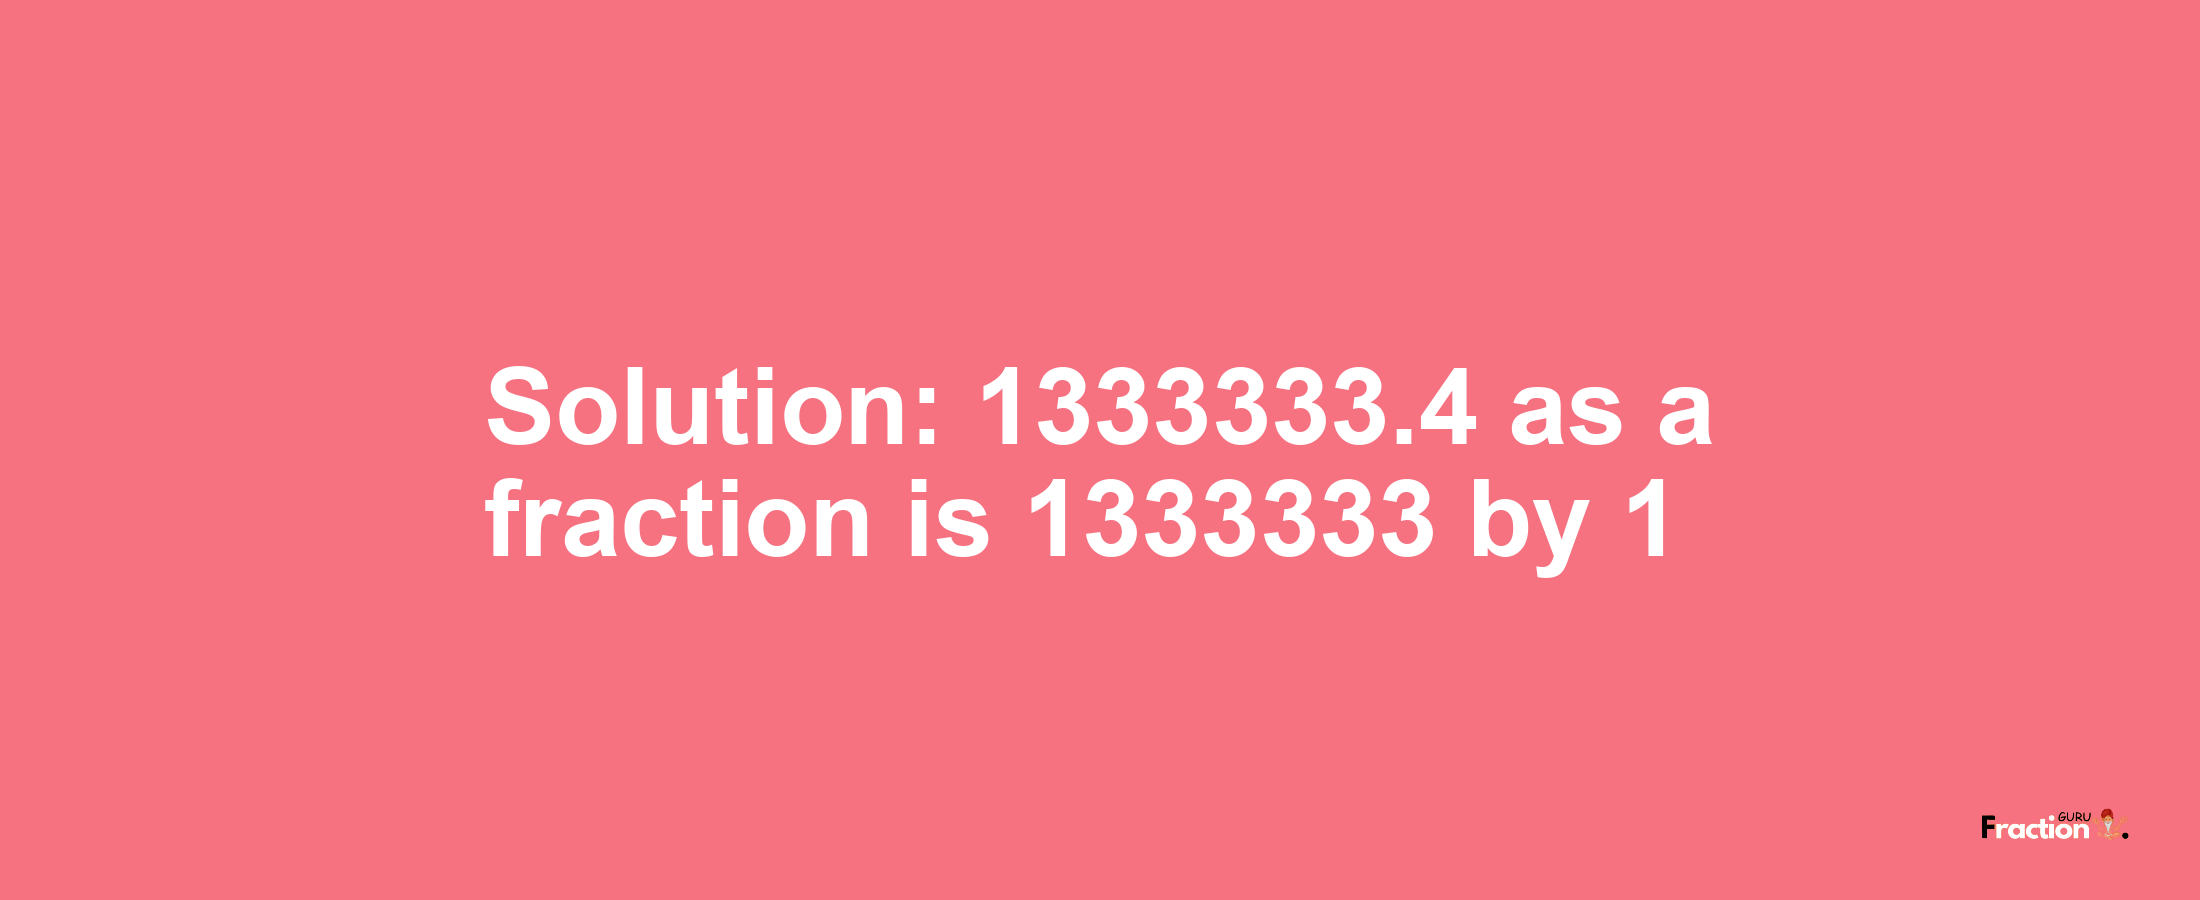 Solution:1333333.4 as a fraction is 1333333/1